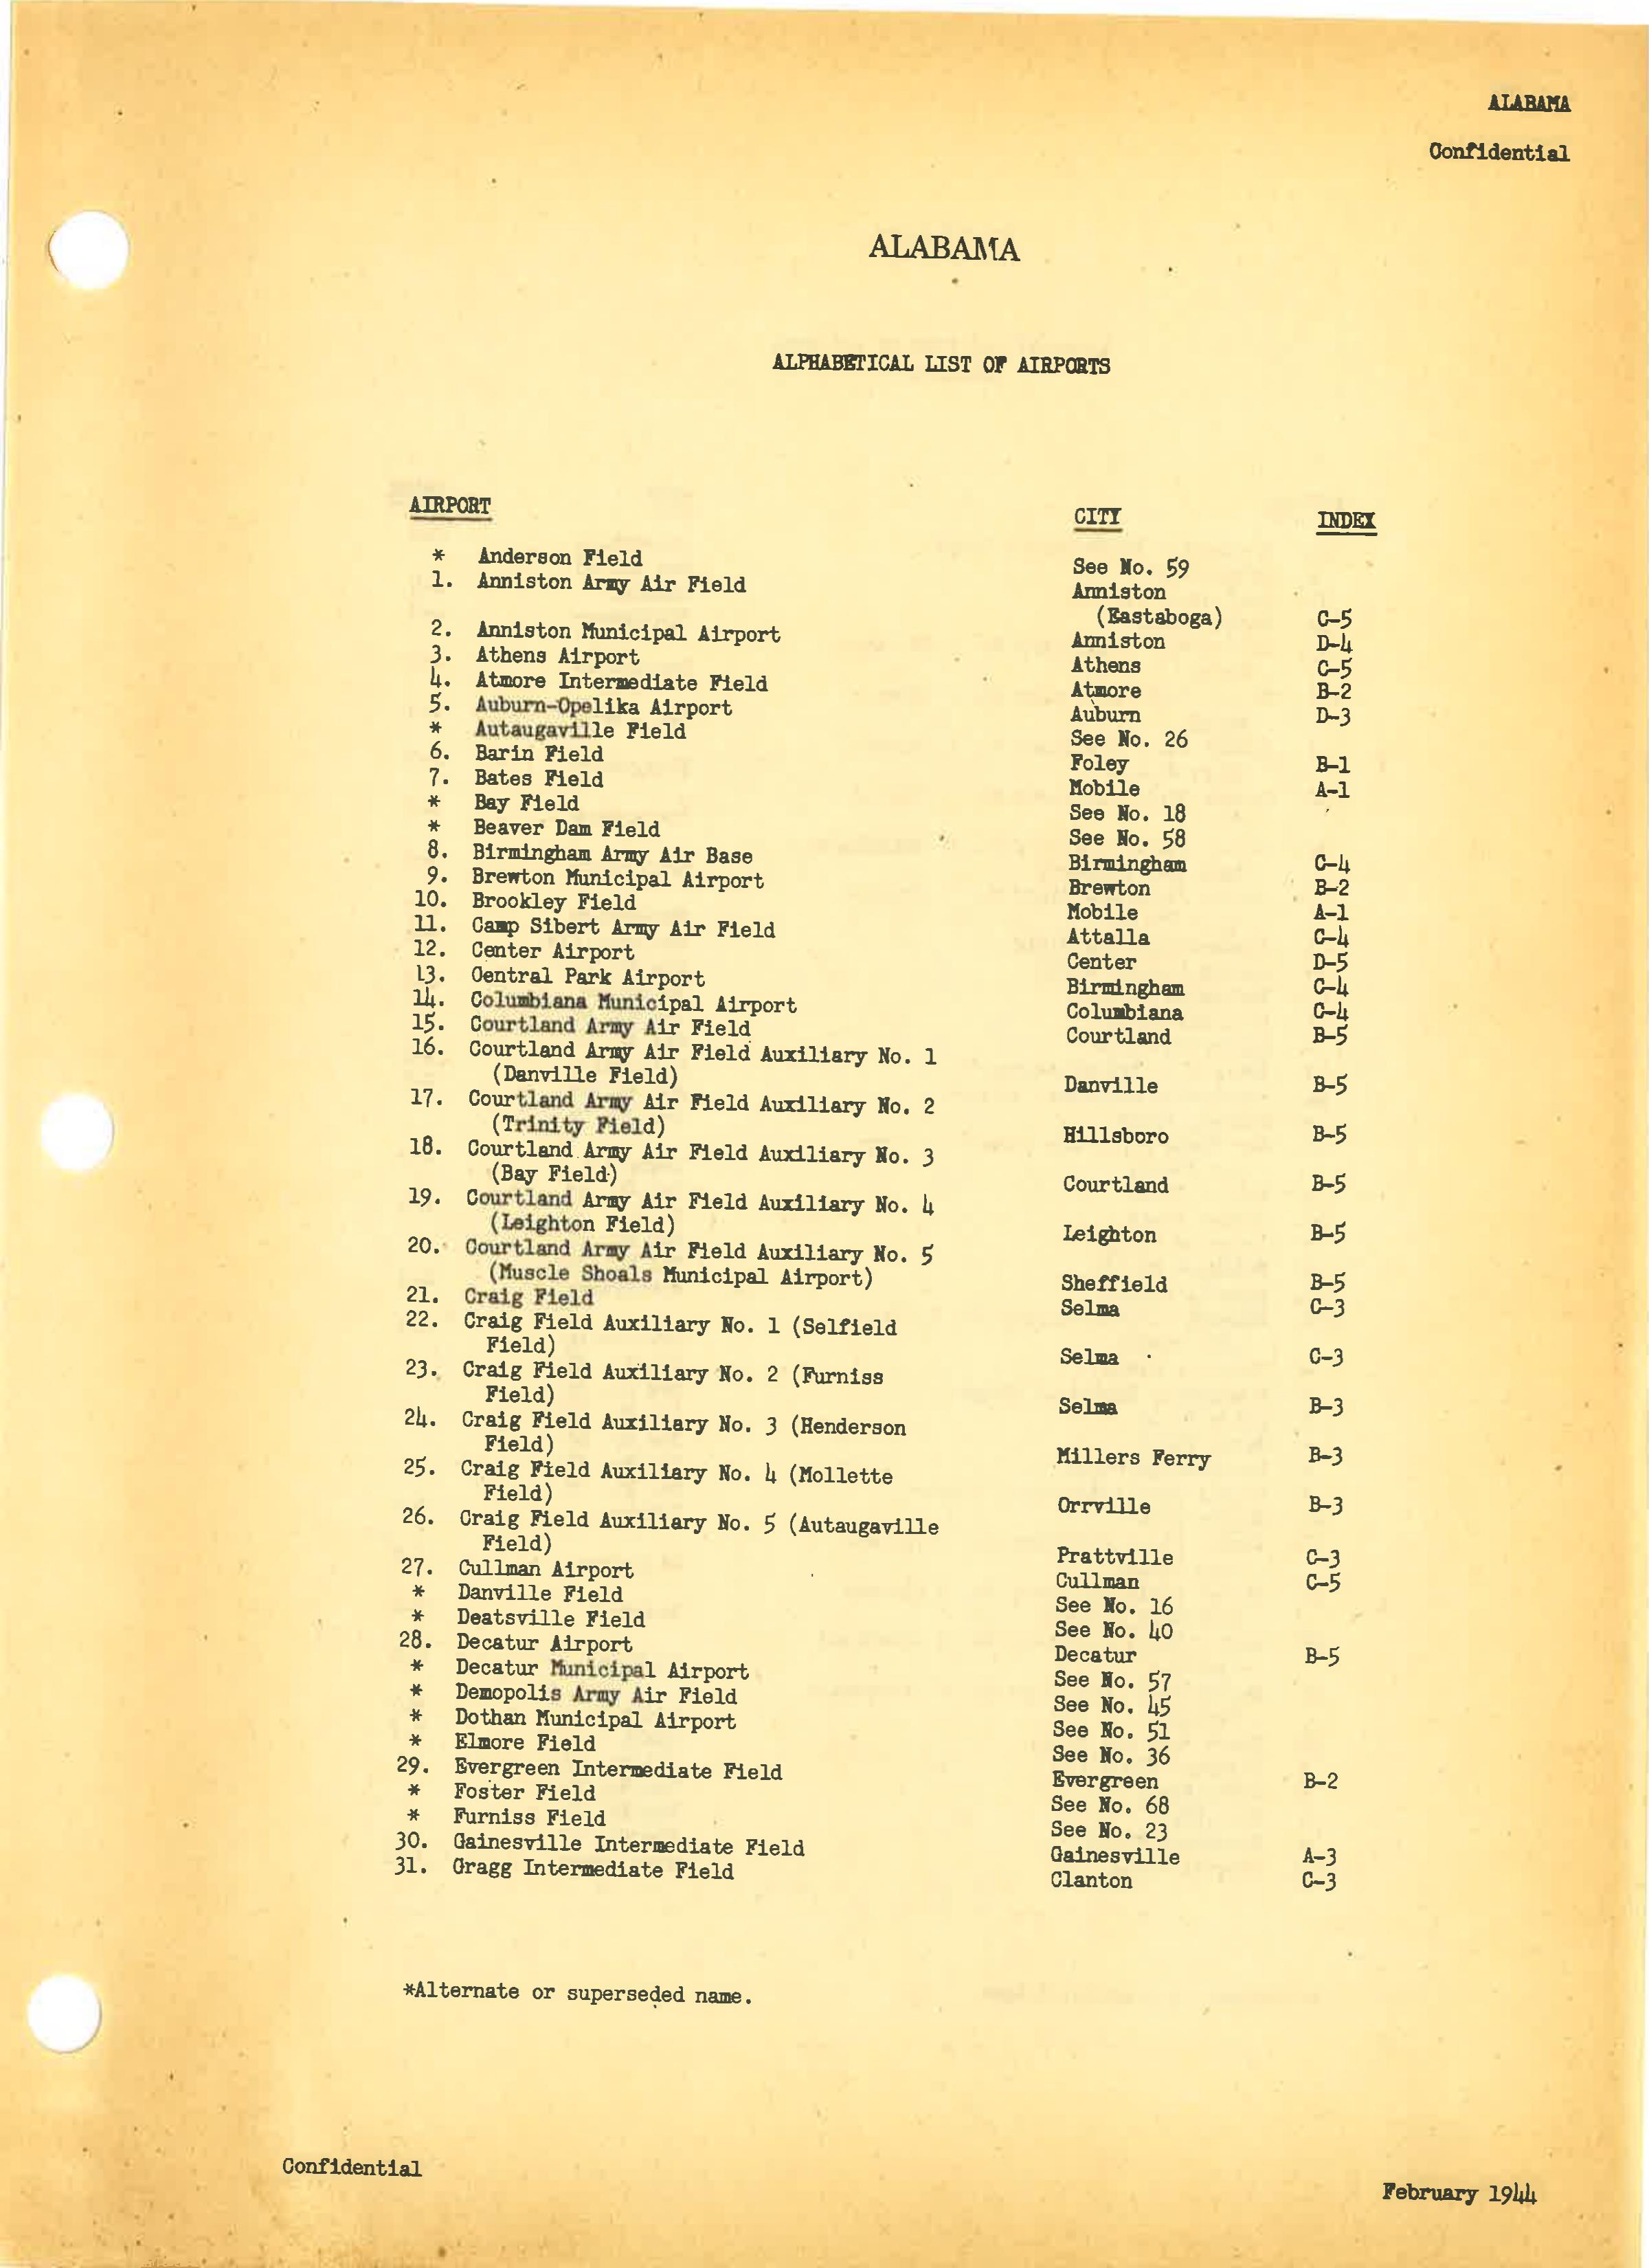 Sample page 10 from AirCorps Library document: Airport Directory of the Continental United States Vol. 1 (AL thru KY)